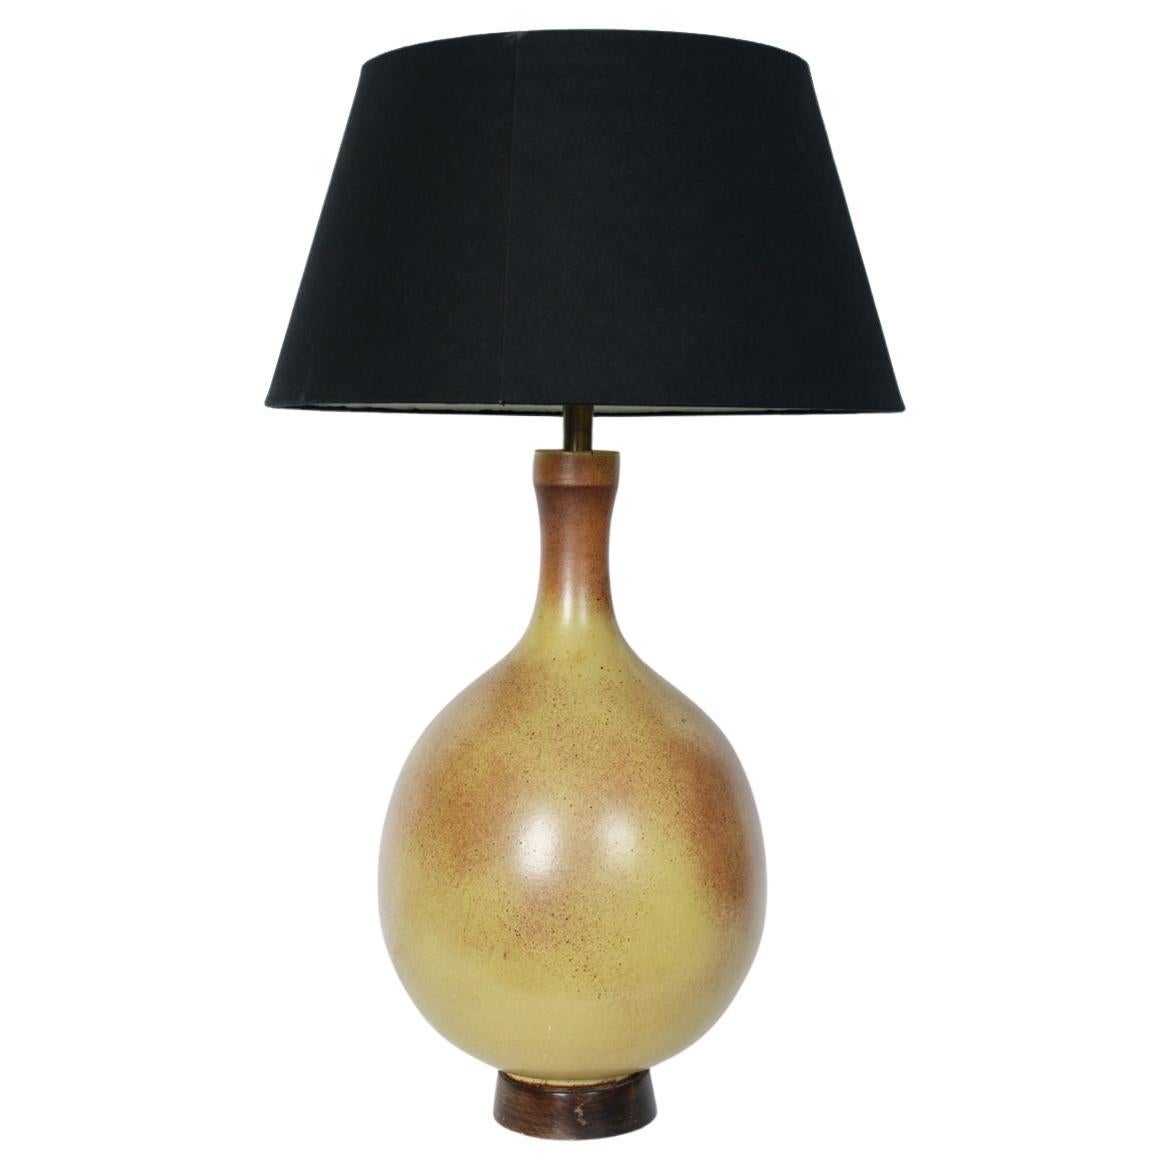 Substantial David Cressey Pale Olive & Umber Art Pottery Table Lamp, 1960's For Sale